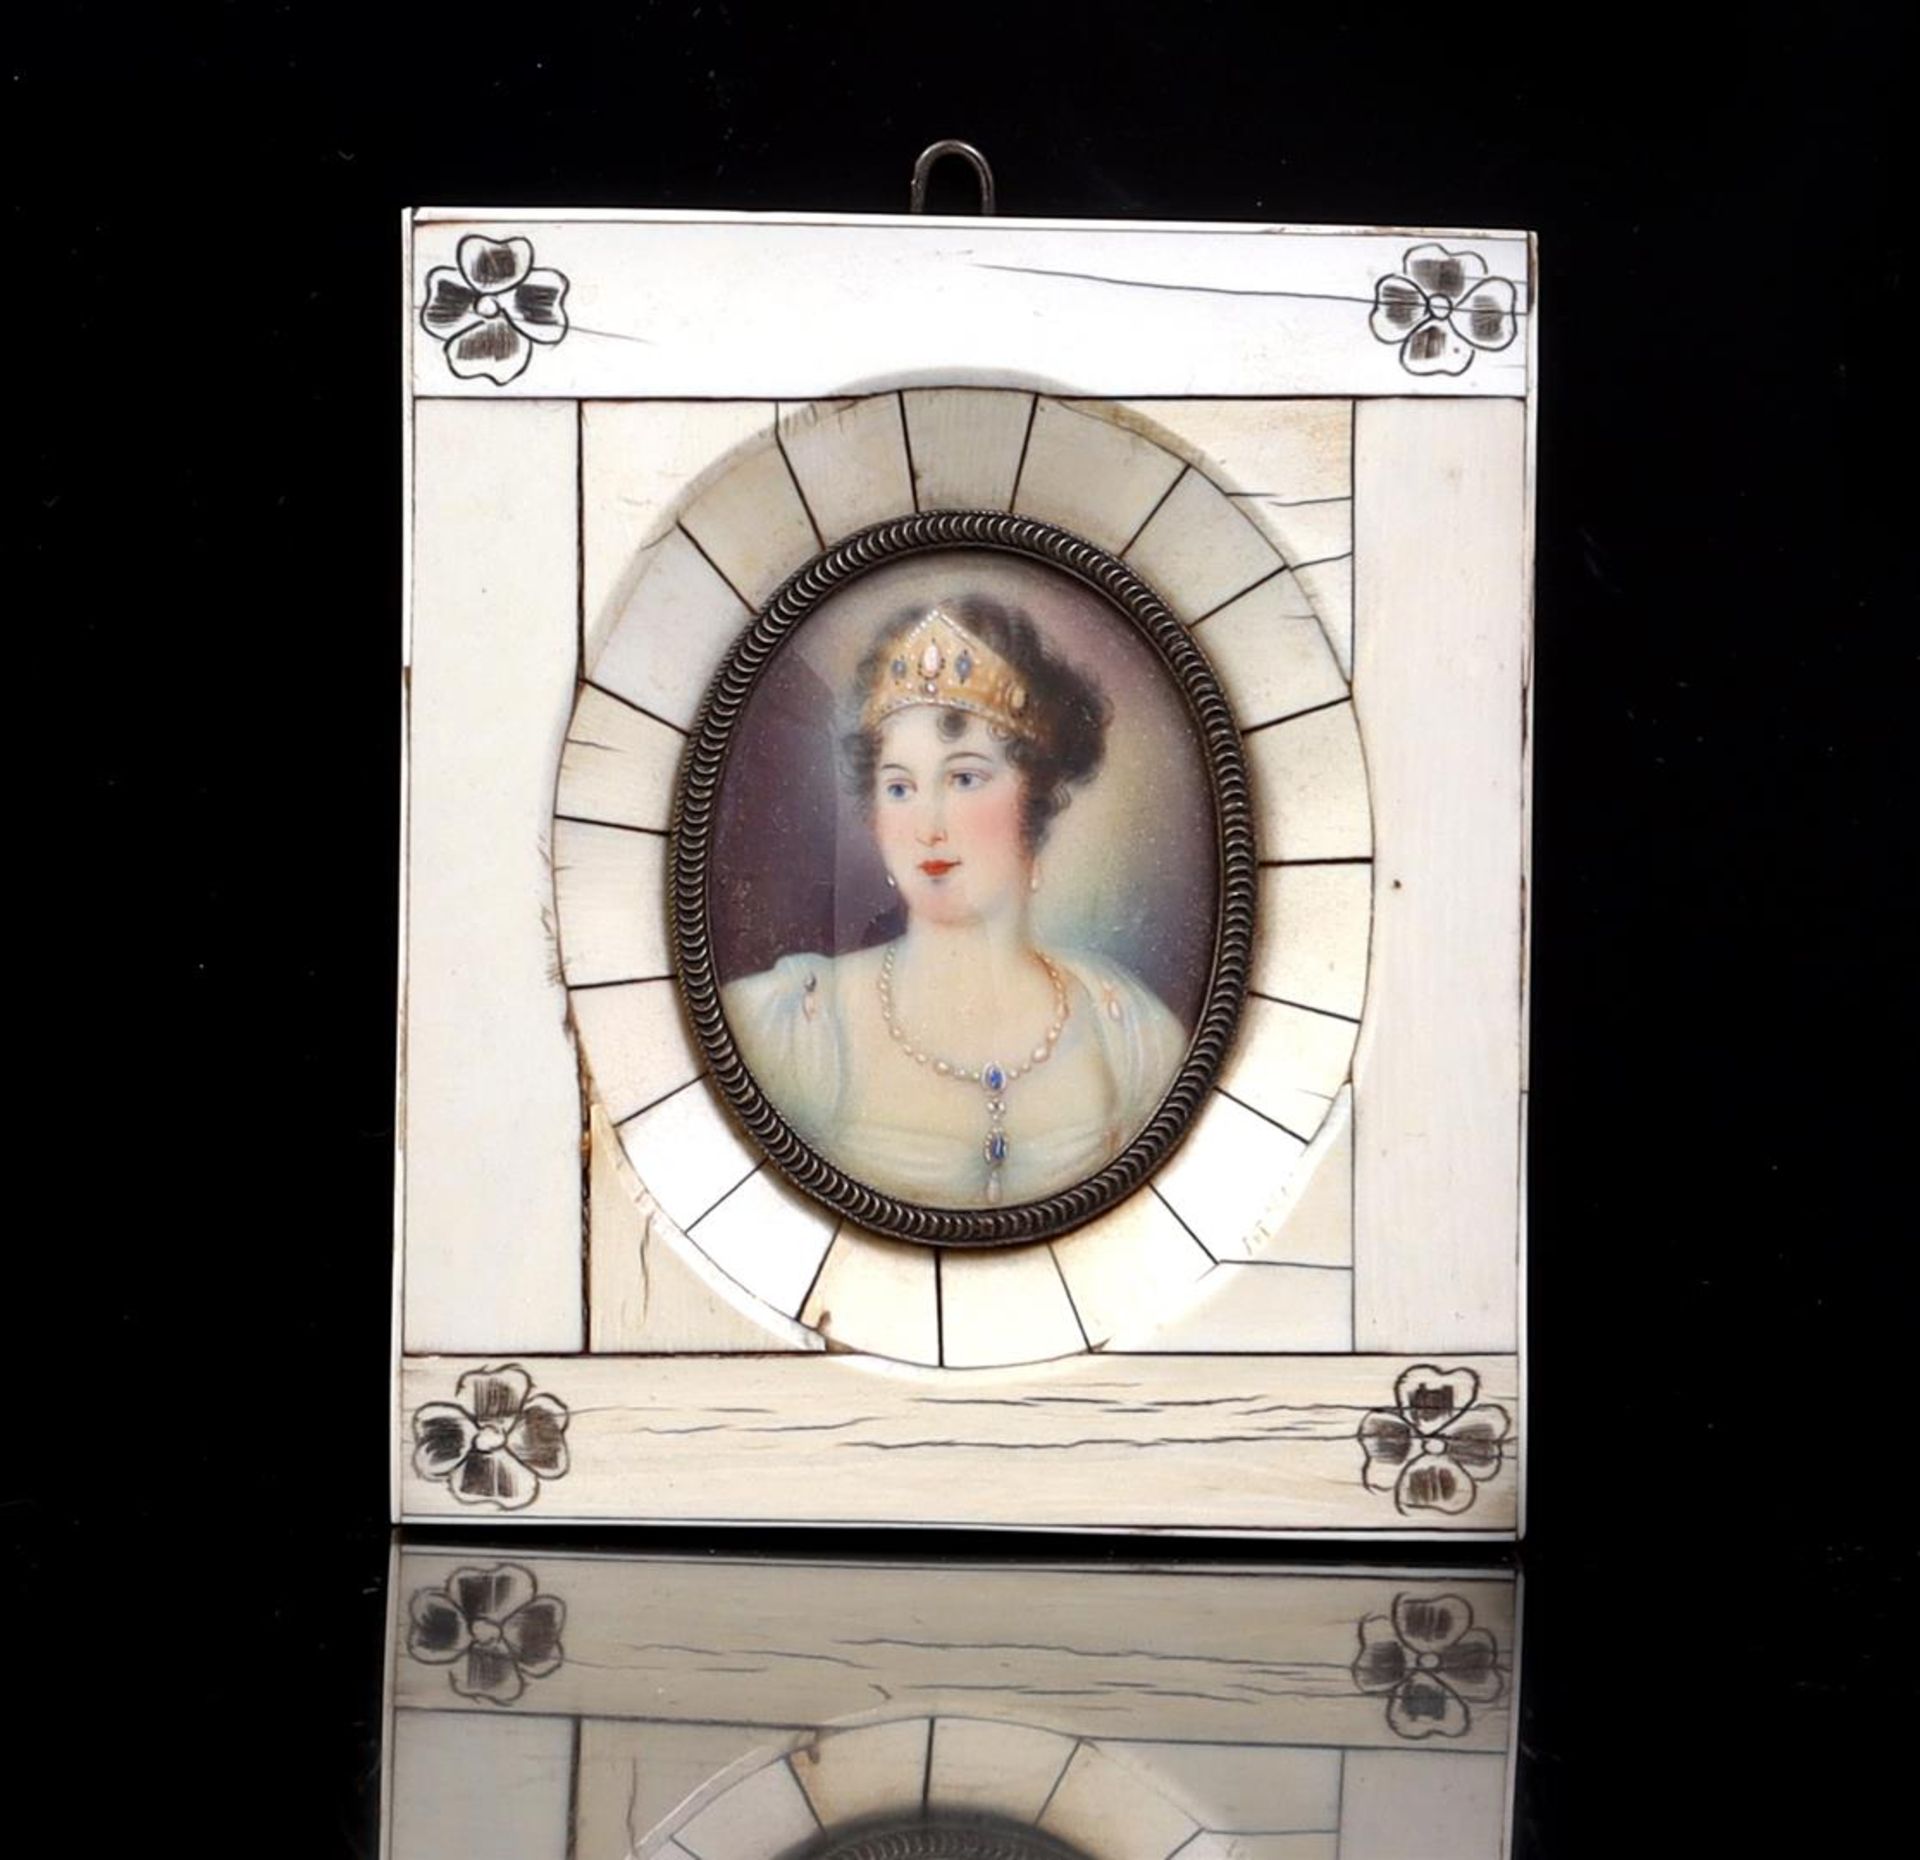 Oval portrait of a posing lady 5x4 cm, in ivory frame, around 1900, outer dimensions 10.5x9 cm, with